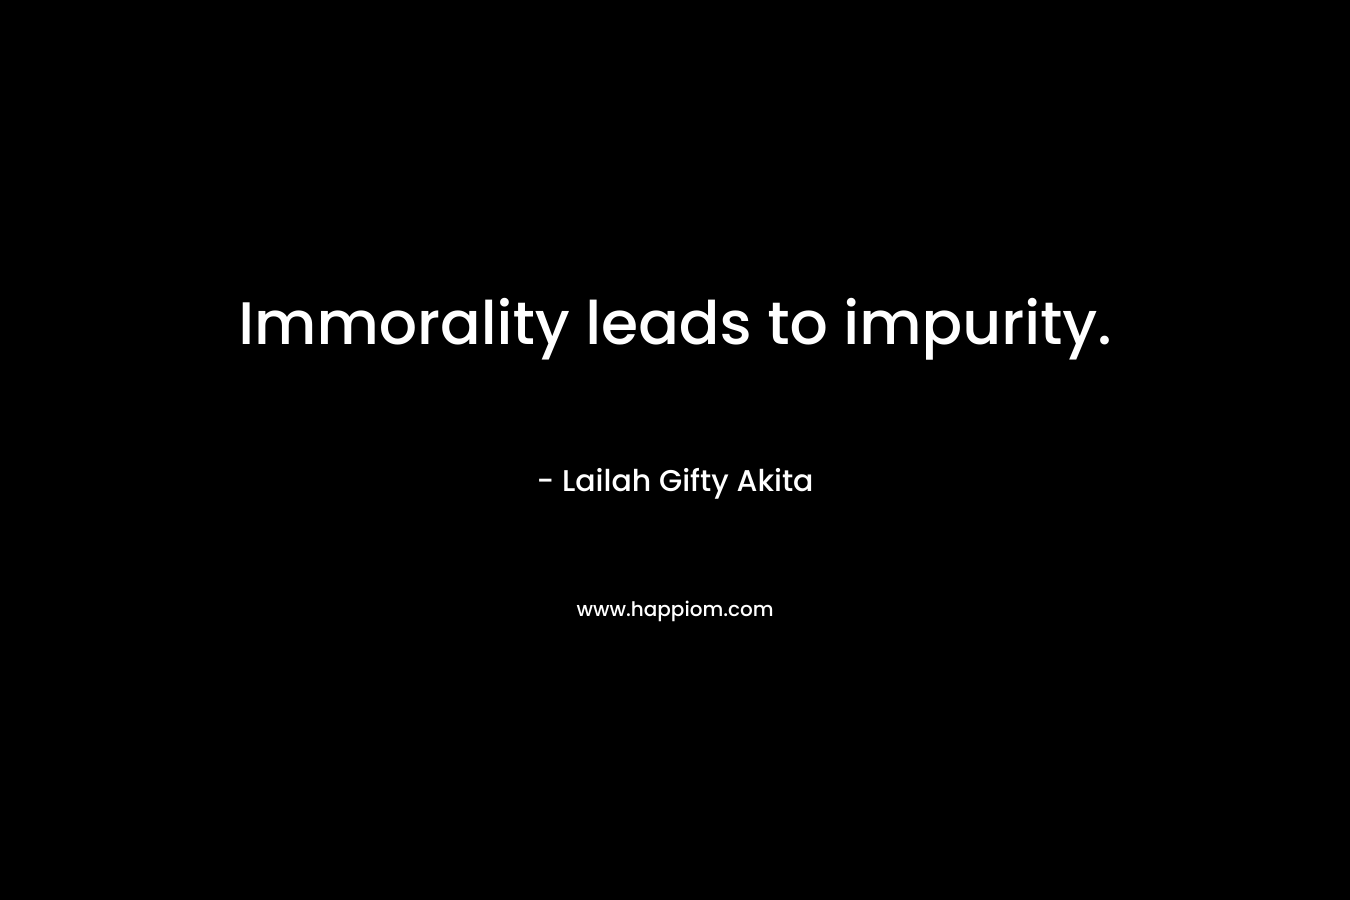 Immorality leads to impurity.